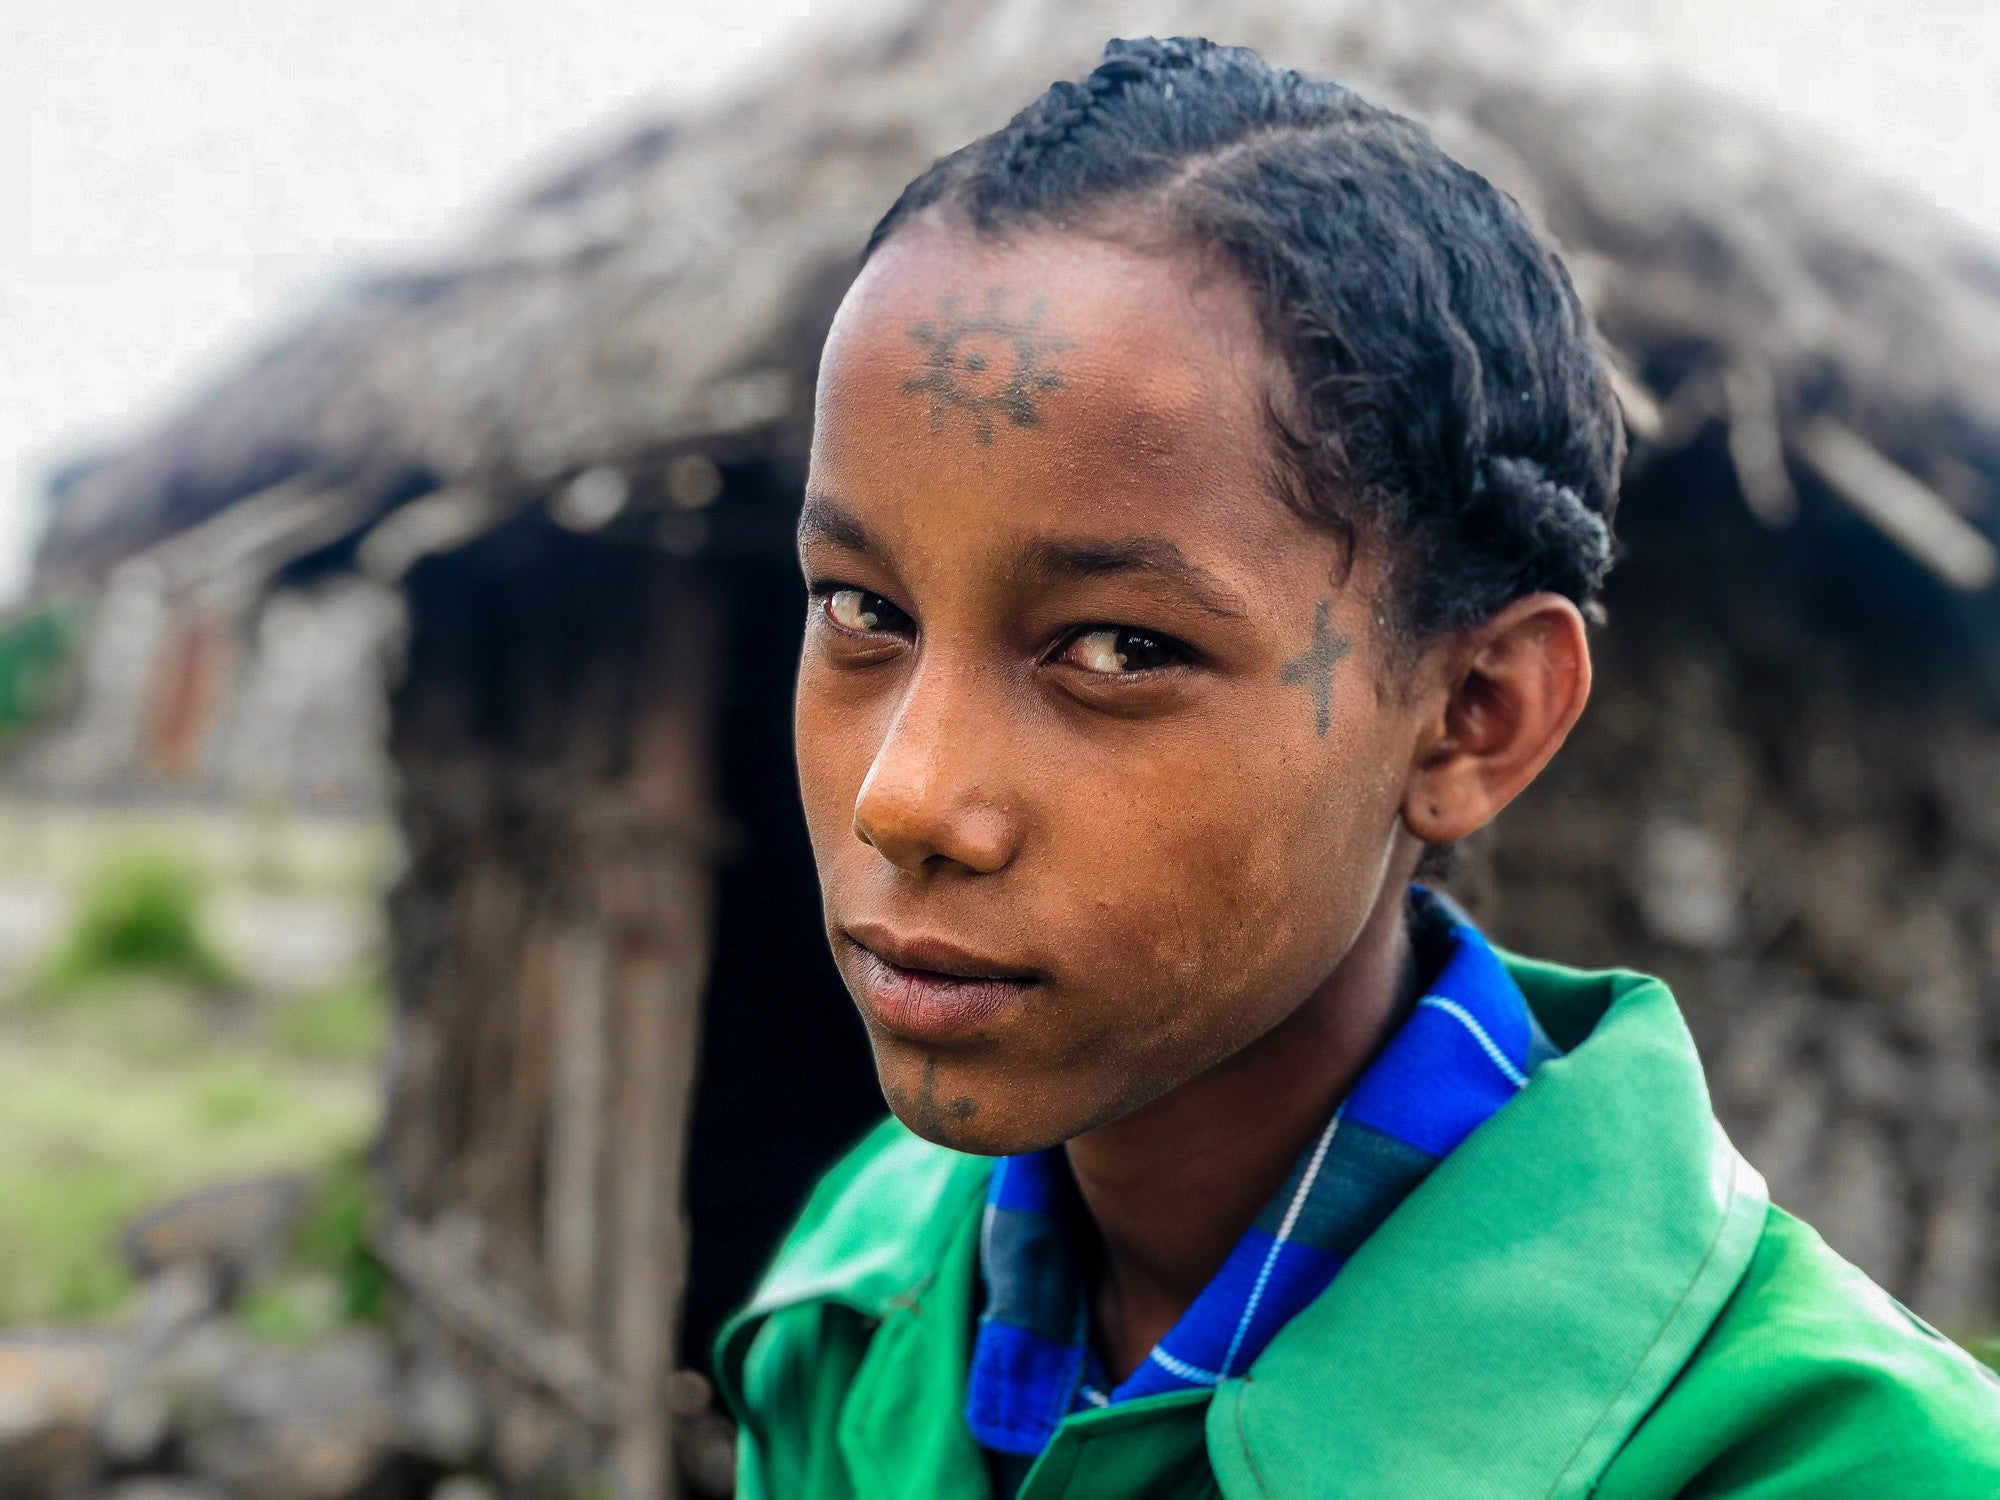 Mikre, also known as the runaway bride, resisted an early marriage to a much older man in rural Ethiopia, and now she is back in school.